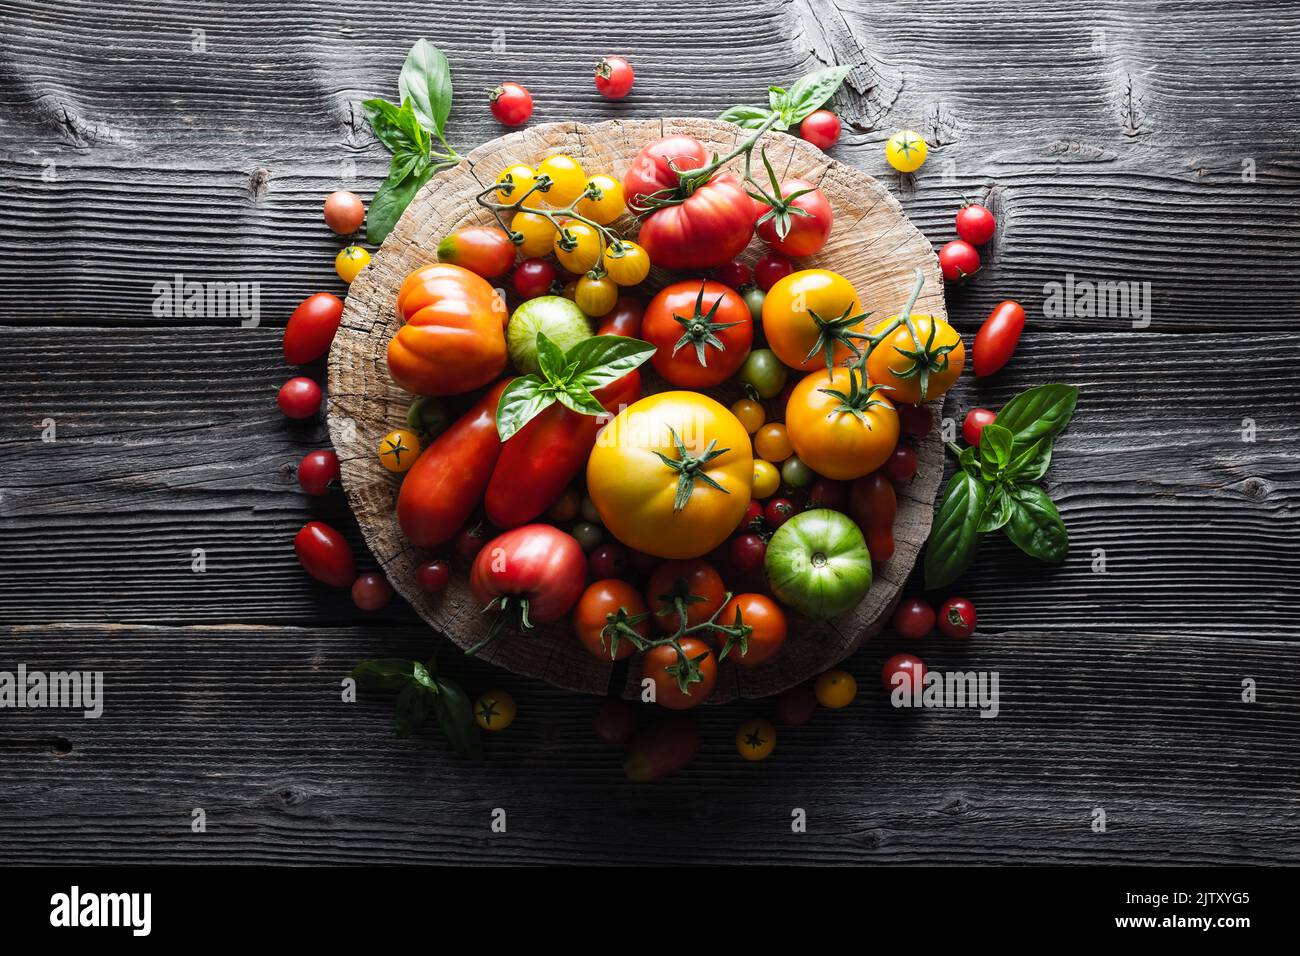 Different varieties kind of red, yellow, green and black tomato mix on wooden table. Fresh assorted colorful summer tomatoes background, close up. Food photography Stock Photo